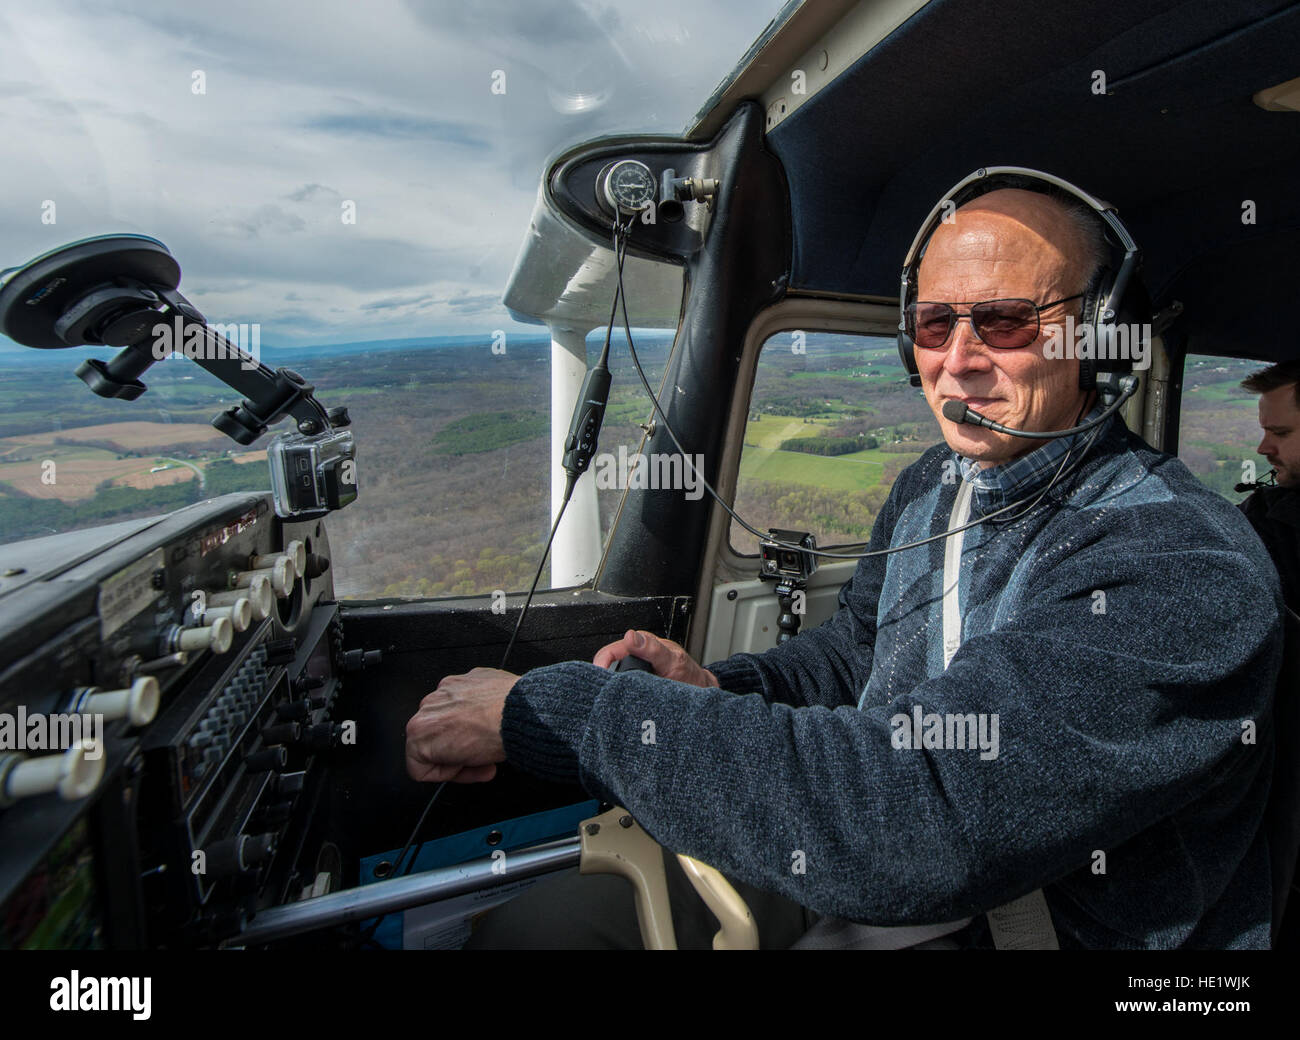 Retired Col. Pete Mapes, a pilot-physician, demonstrates a ground collision avoidance system he installed on his Cessna aircraft during a flight over Maryland, April 7, 2016. Mapes was instrumental to the employment the Automatic  Ground Collision Avoidance System in F-16 fighter jets across the Air Force. /Master Sgt. Brian Ferguson Stock Photo